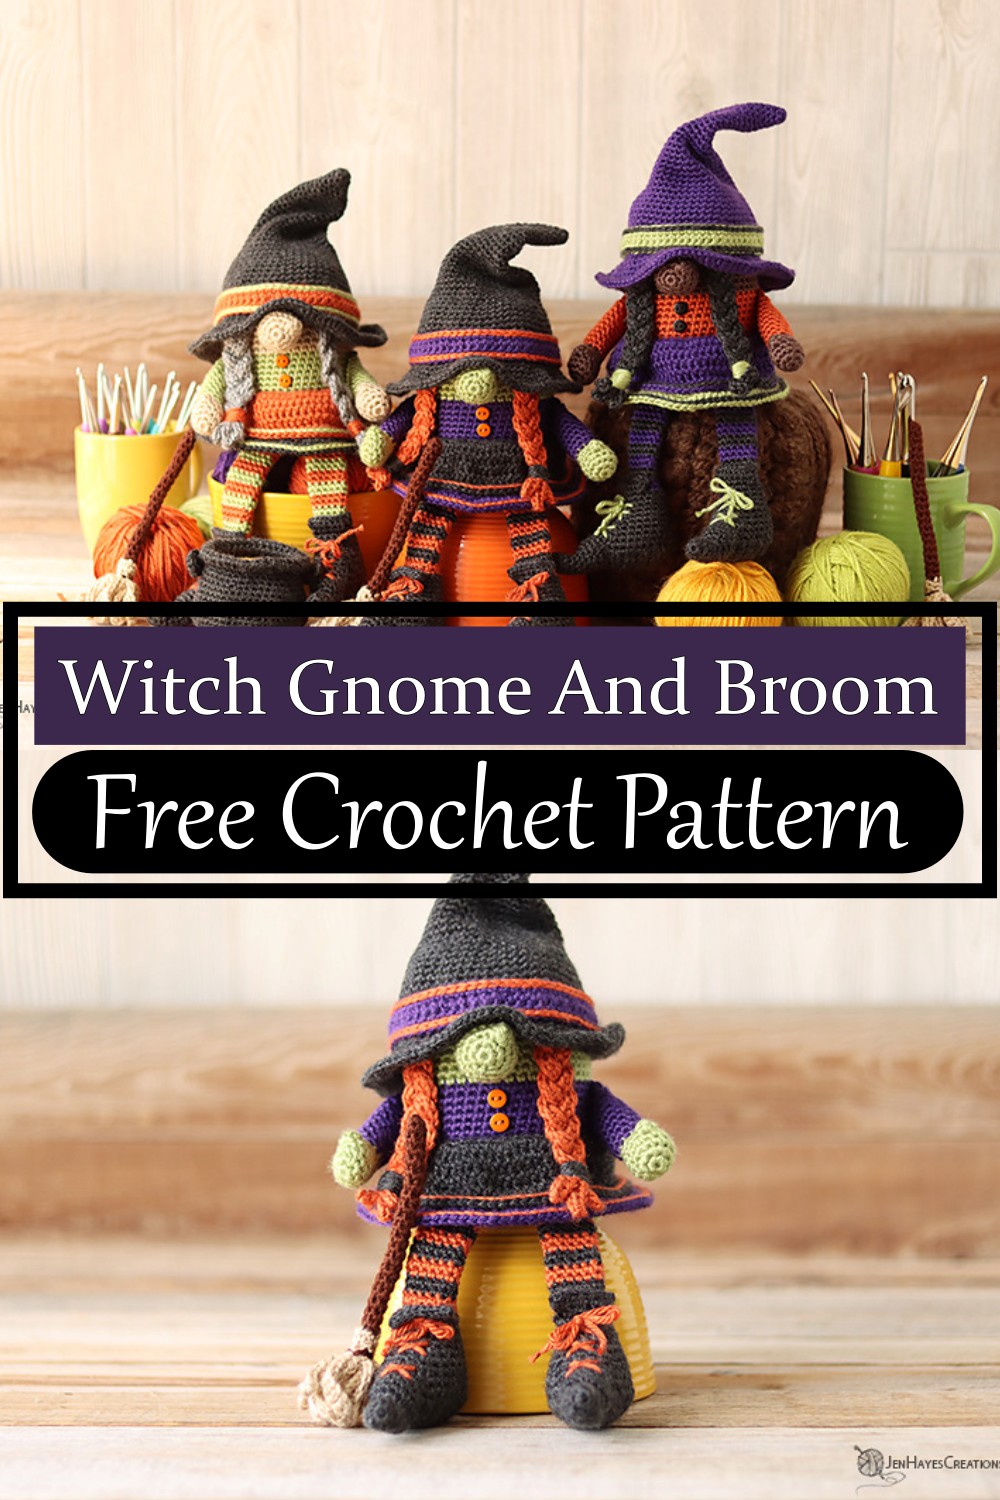 Witch Gnome And Broom